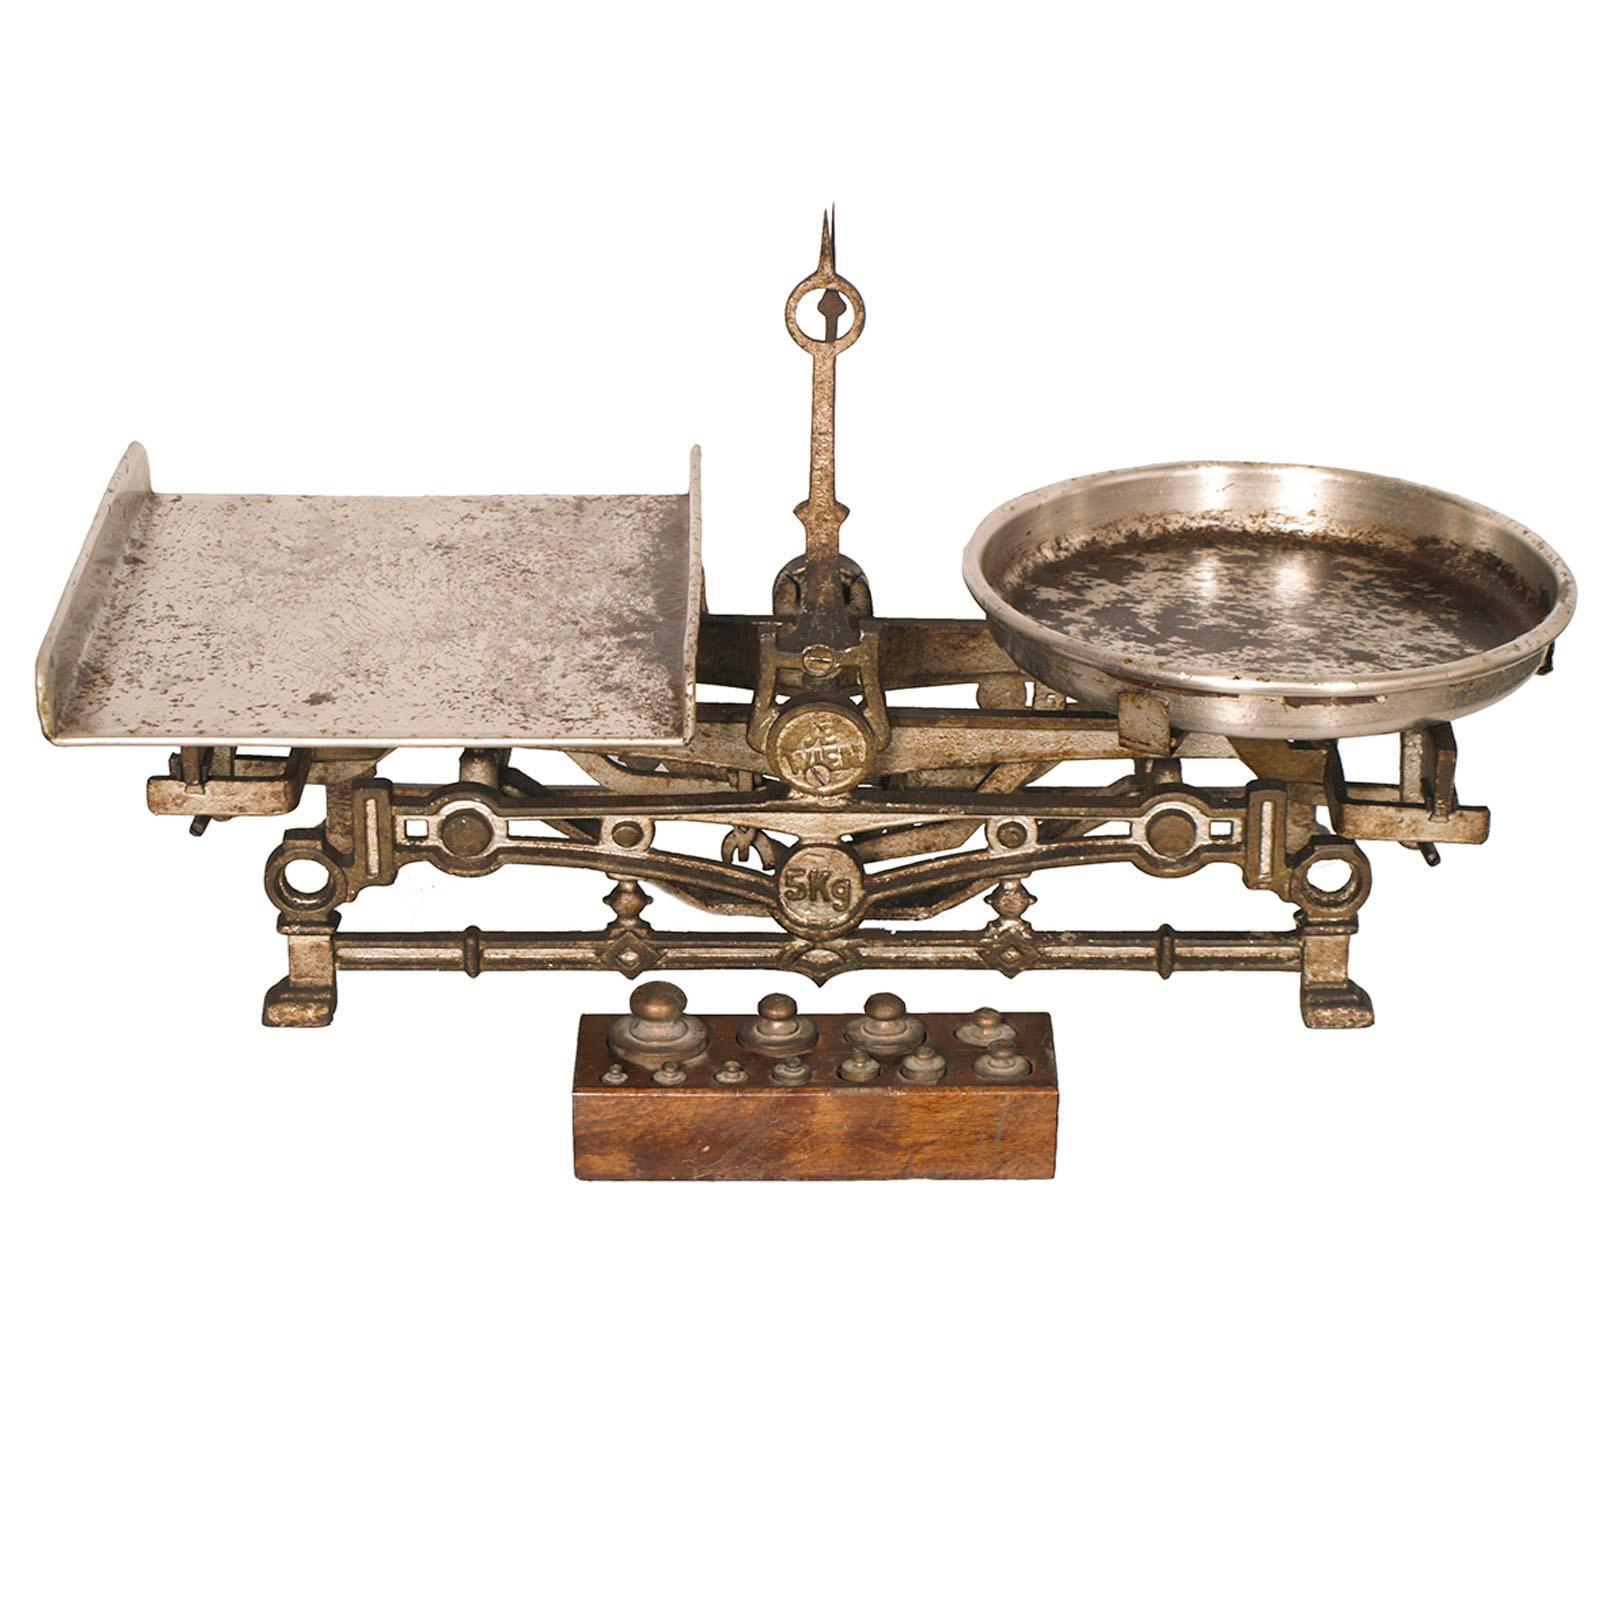 19th century, chrome steel Austrian balance, by J. Florenz Wien, 11 brass weights, 5 kg.

This precious antique table scale was from the famous Caffè Florian in Venice
Caffè Florian is a historic café in the city of Venice, located under the